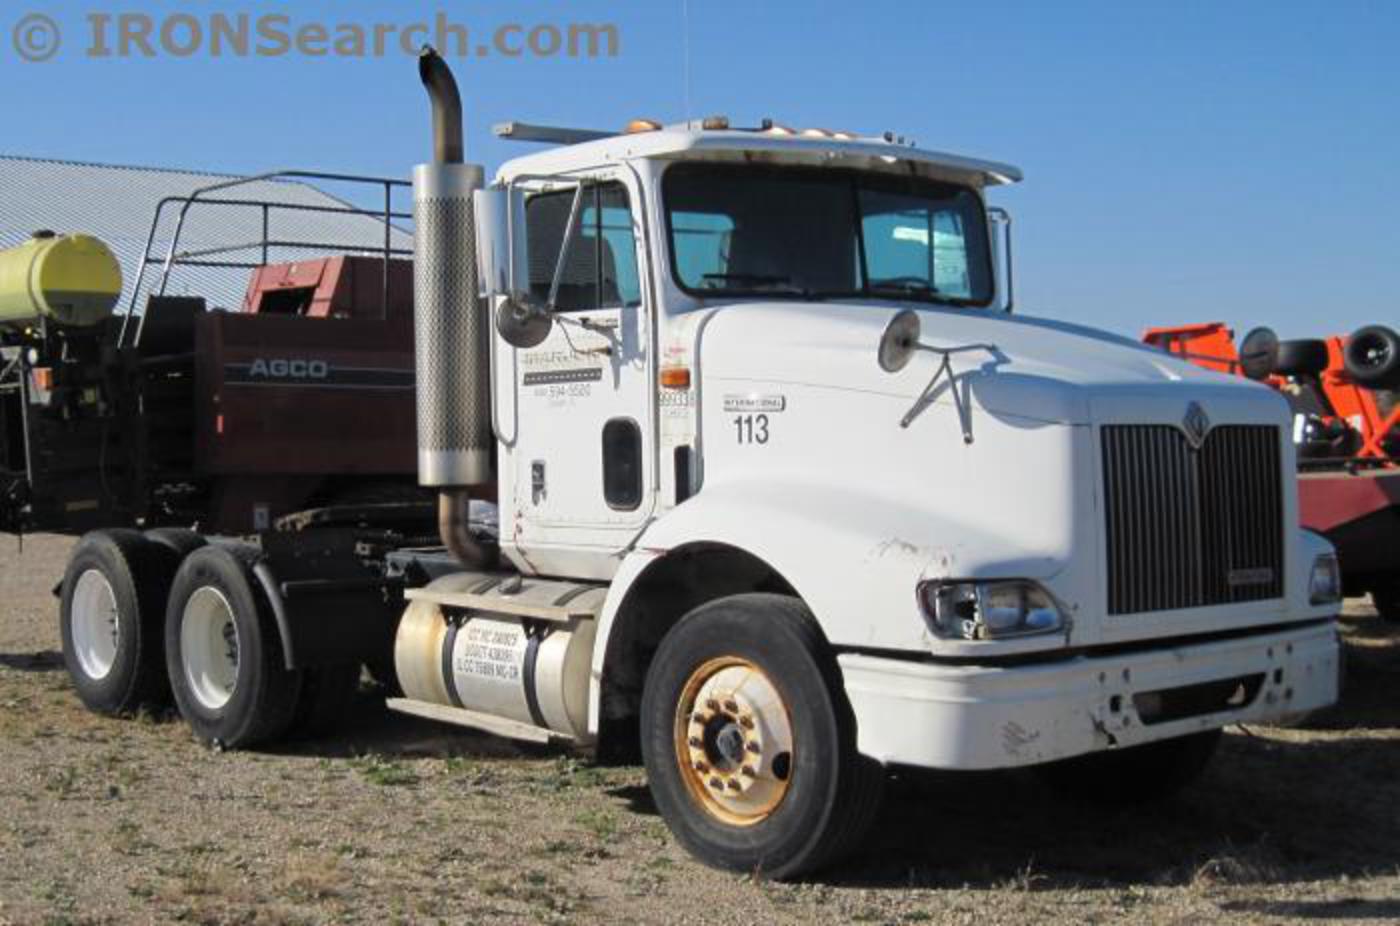 IRON Search - 1998 International Unknown Truck For Sale By ...